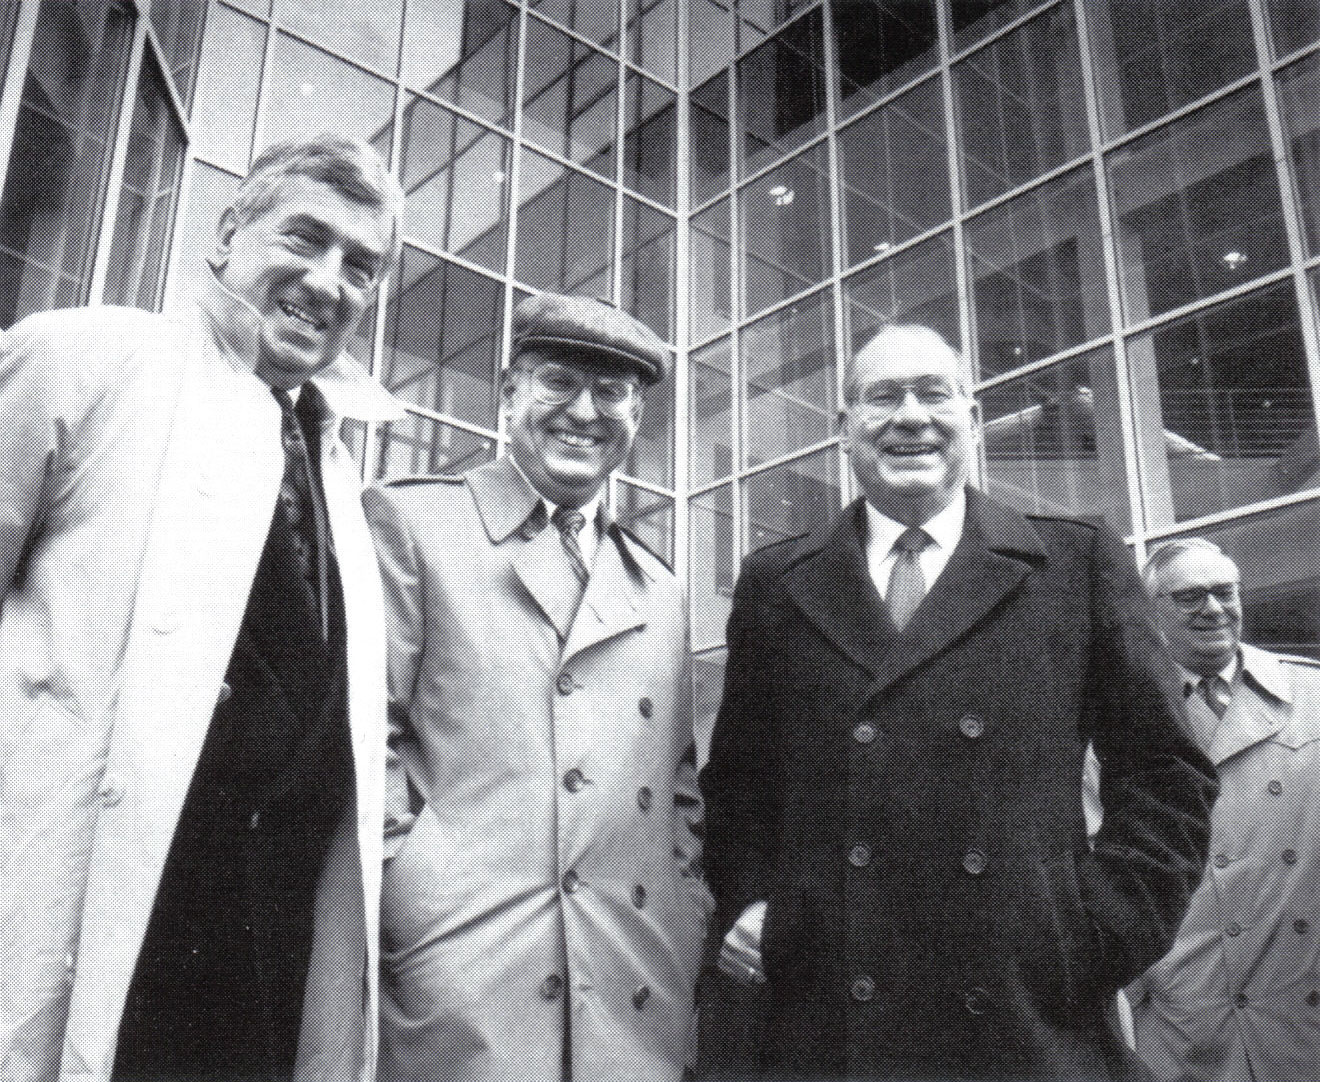 Dedication of the polymer science building, April 1, 1991.